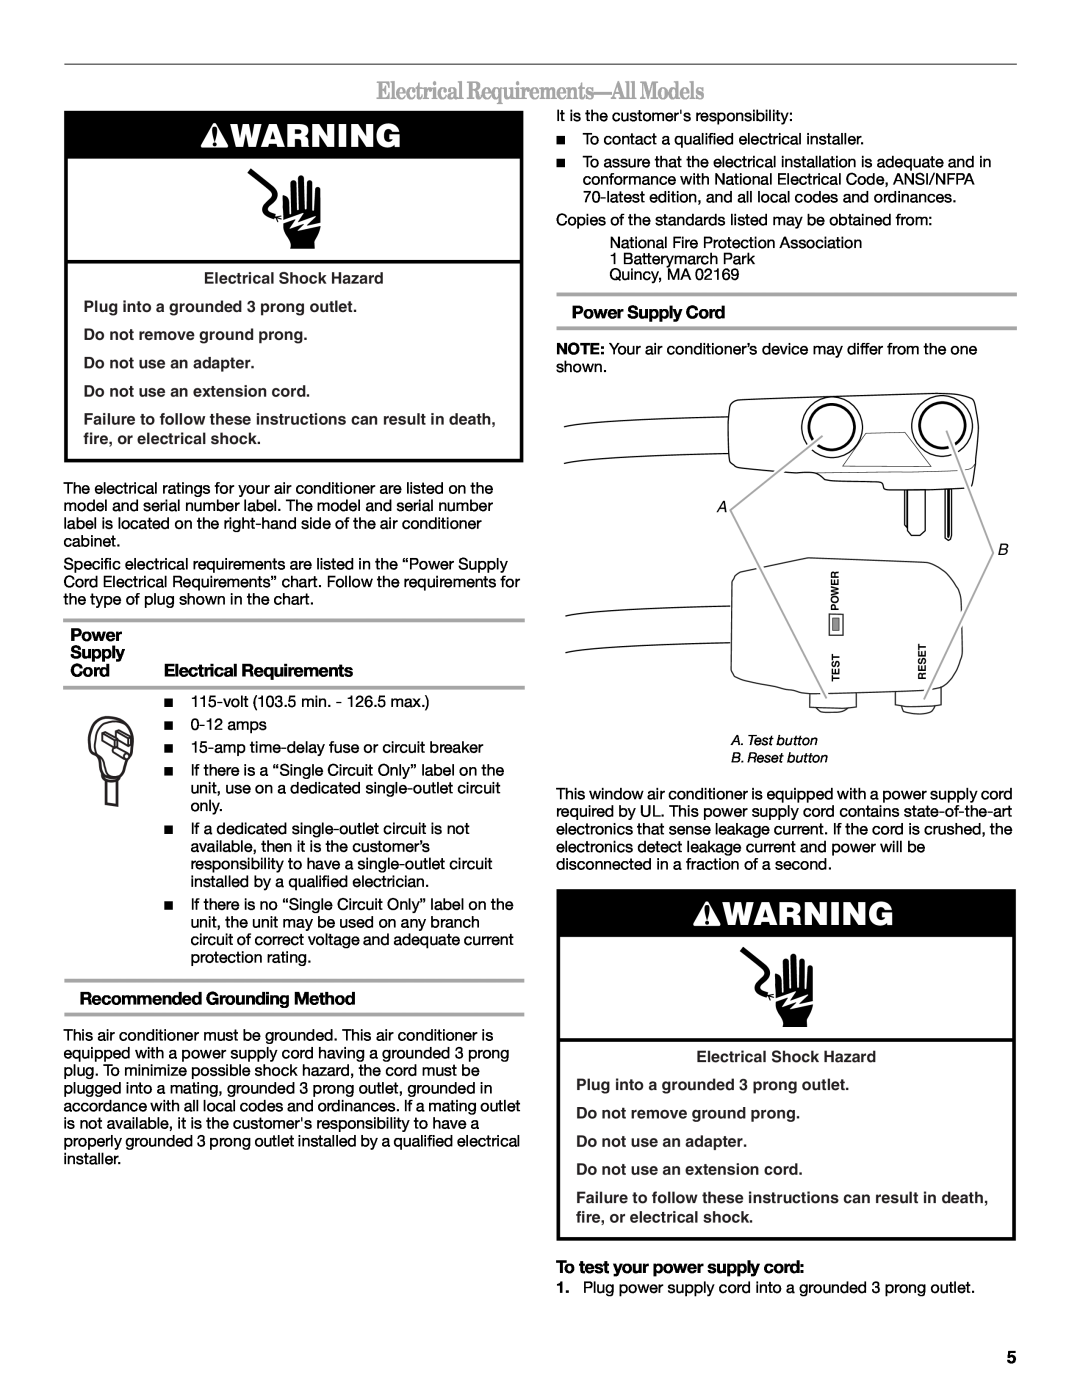 Whirlpool 66161279 manual Electrical Requirements-AllModels, Power Supply Cord, Recommended Grounding Method 